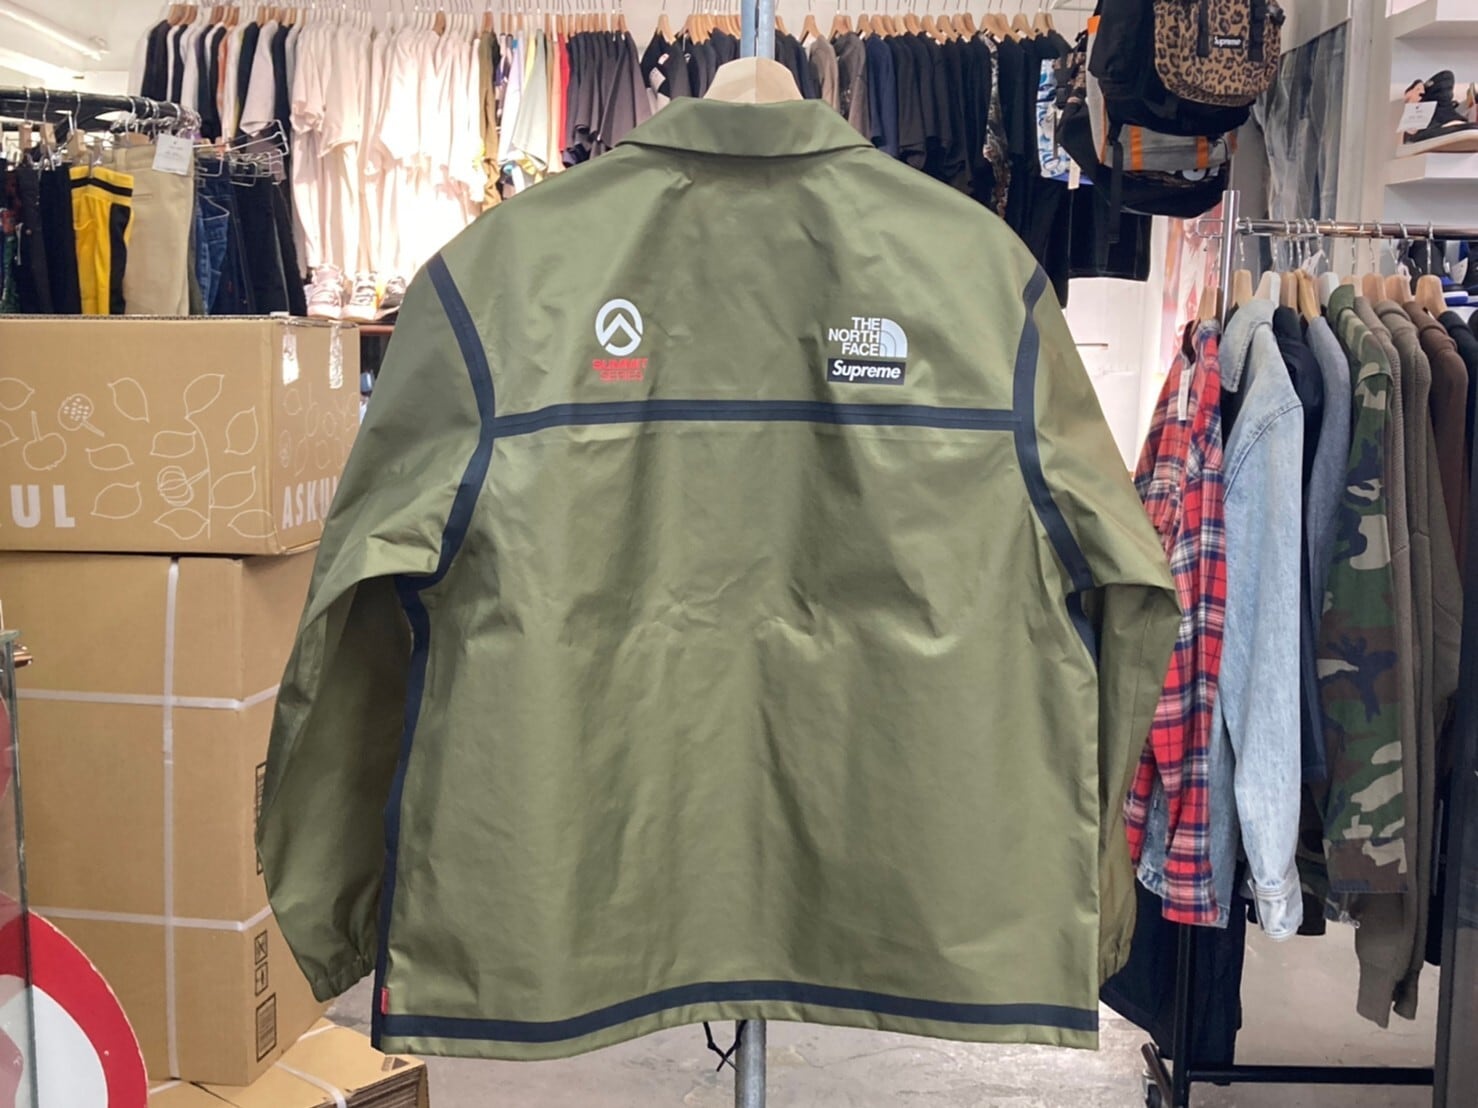 Outer Tape Seam Coaches Jacket  Olive Xl